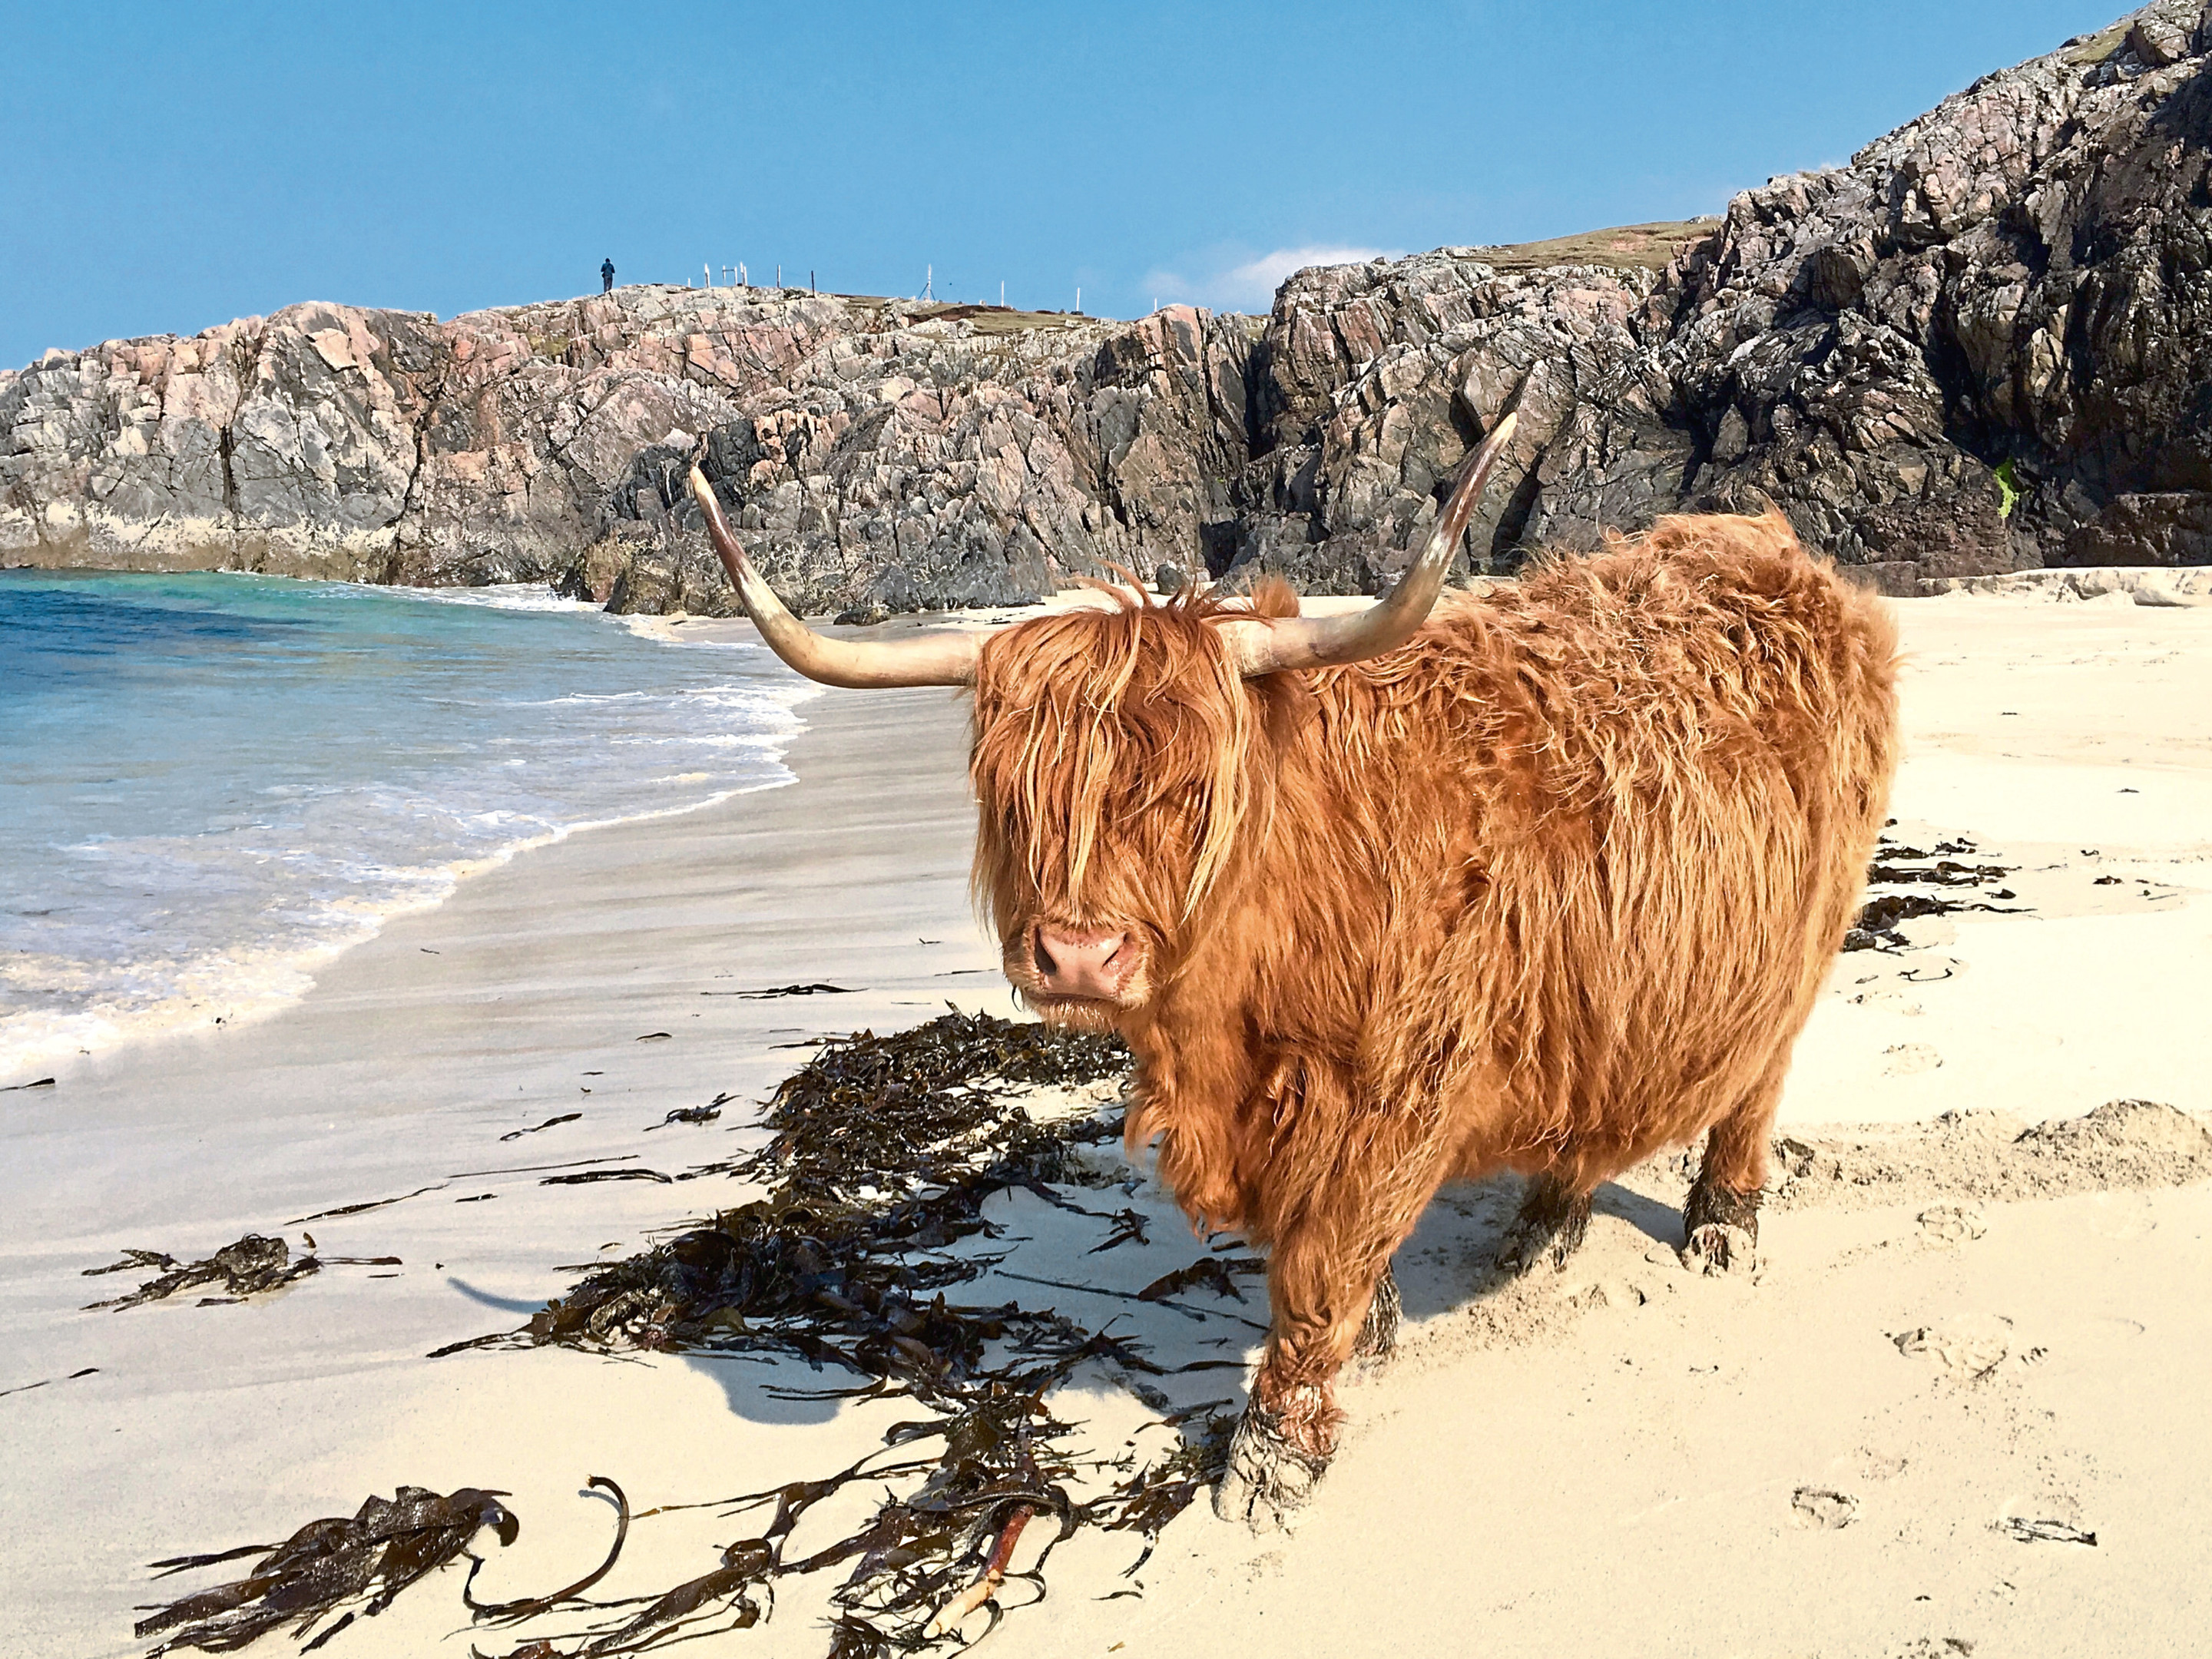 Seaweed has been found to abate methane emissions from cattle.